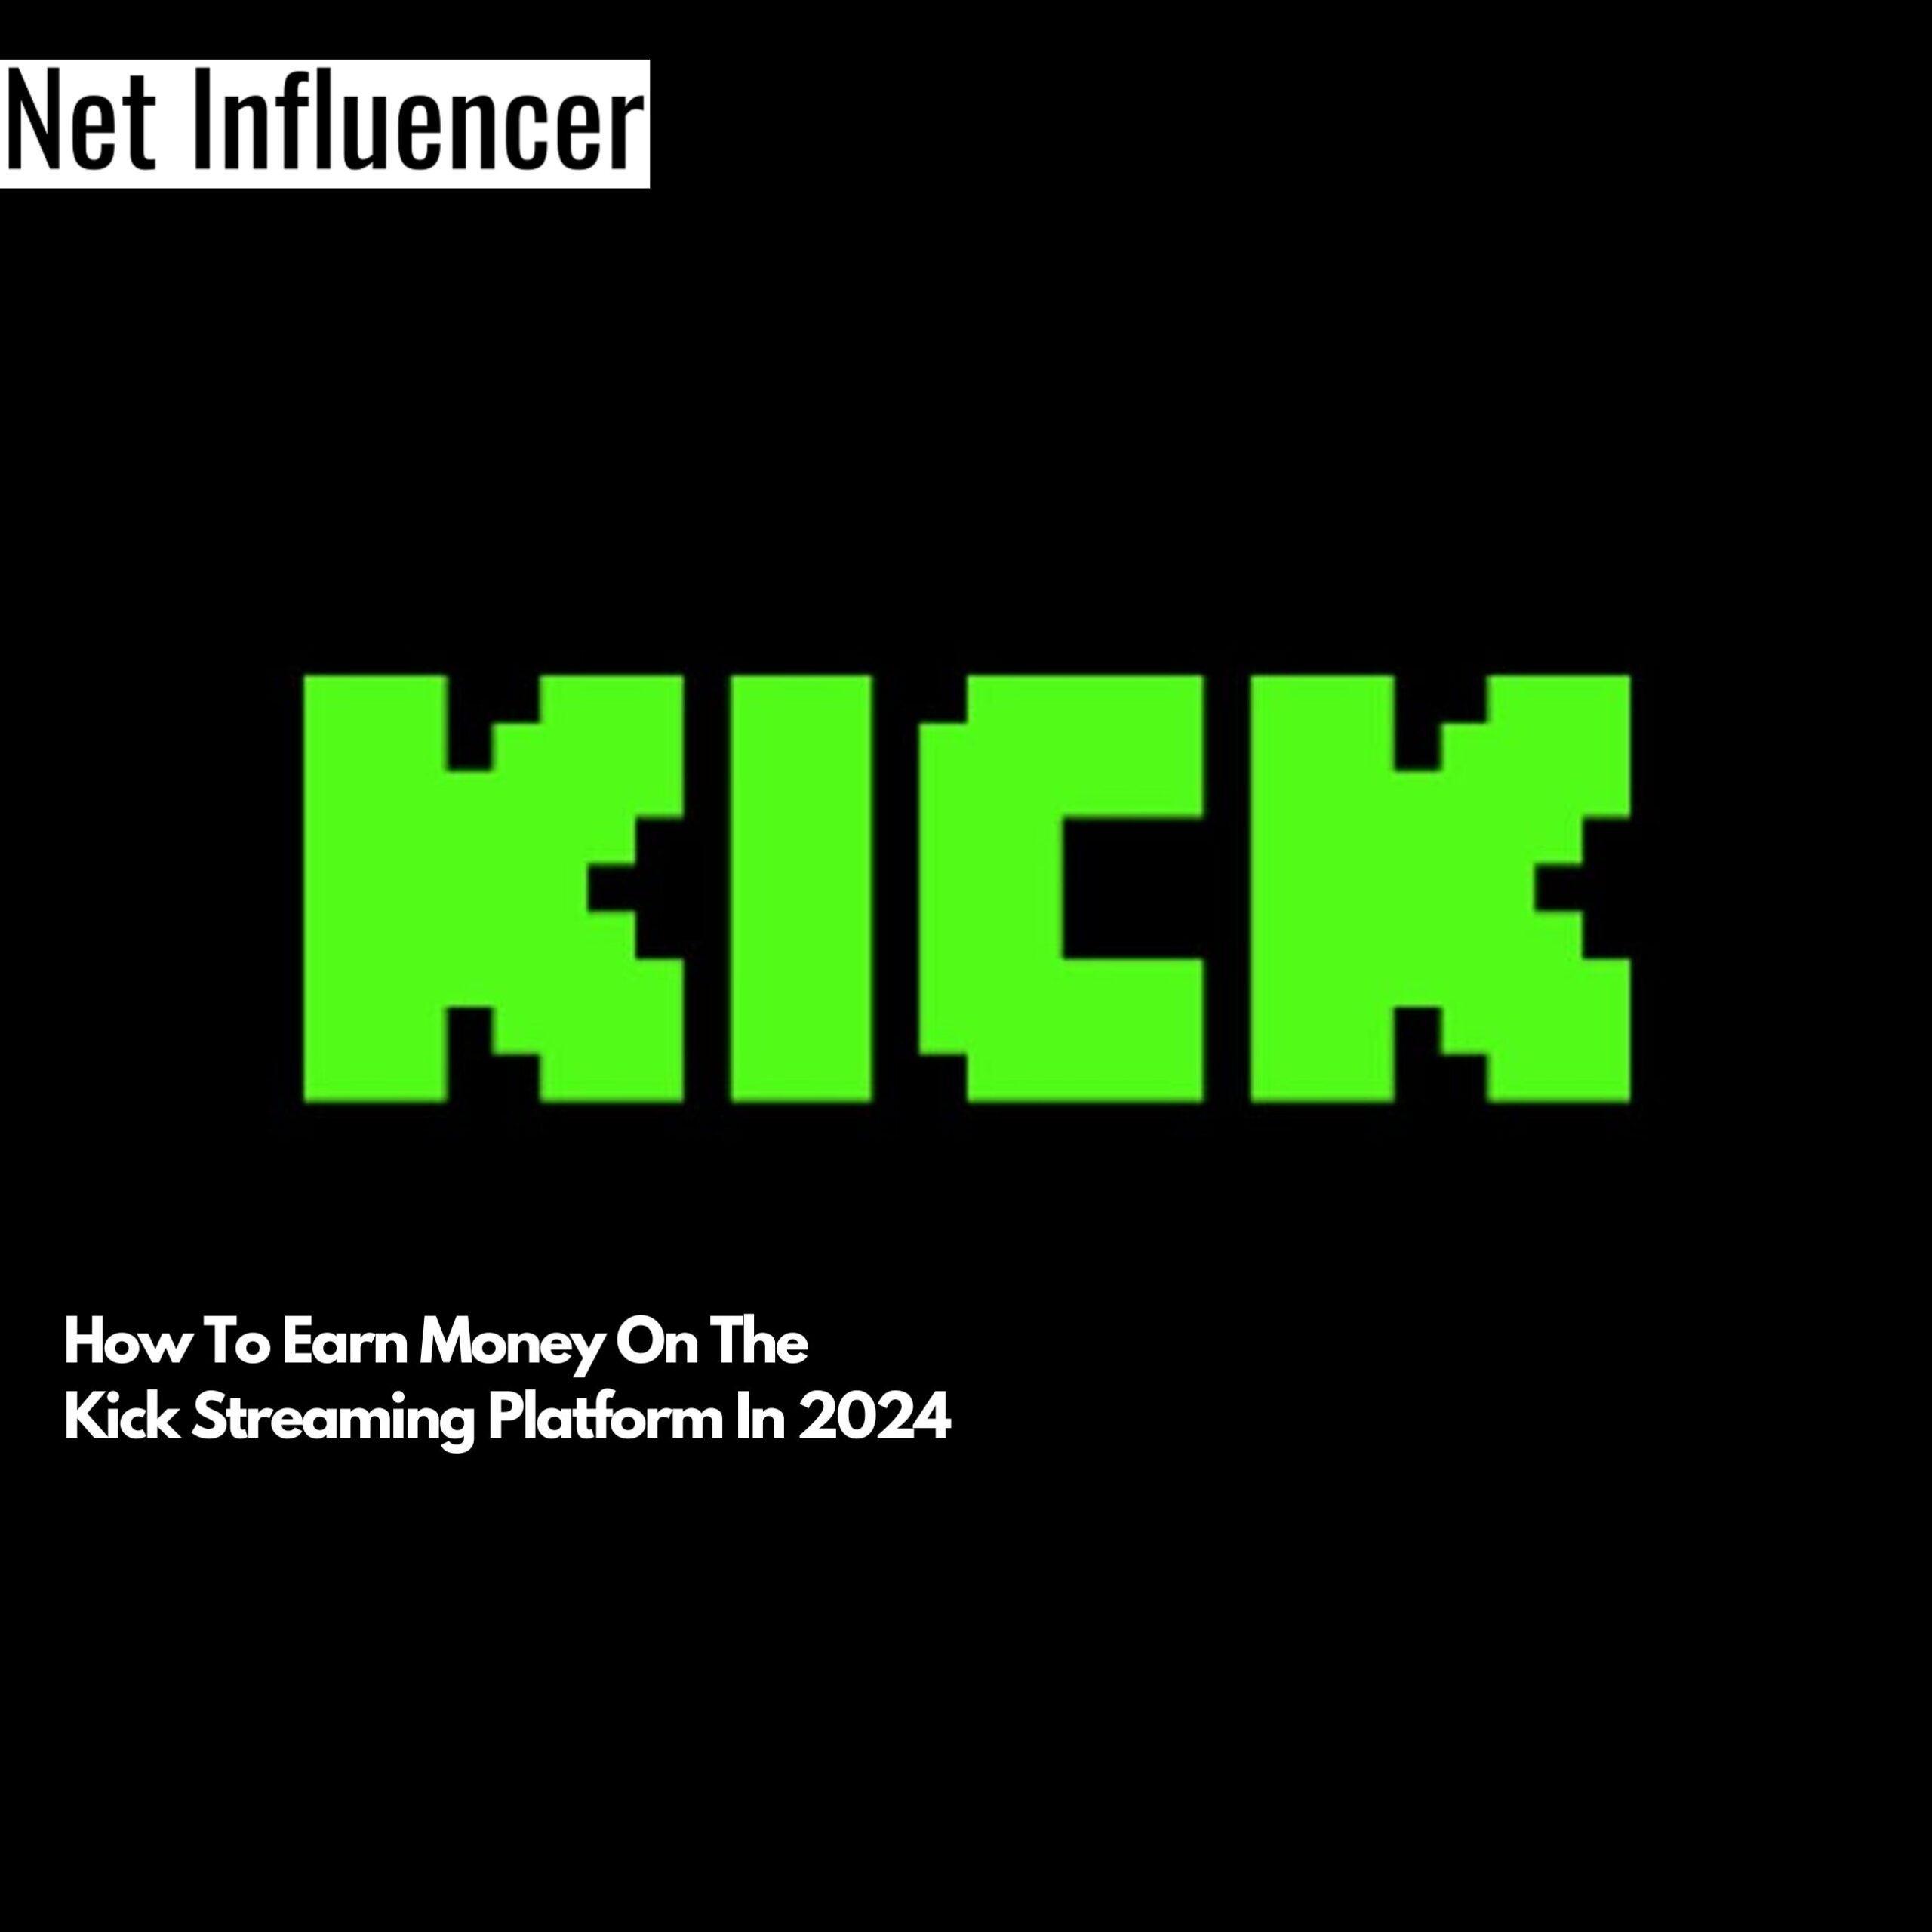 How To Earn Money On The Kick Streaming Platform In 2024